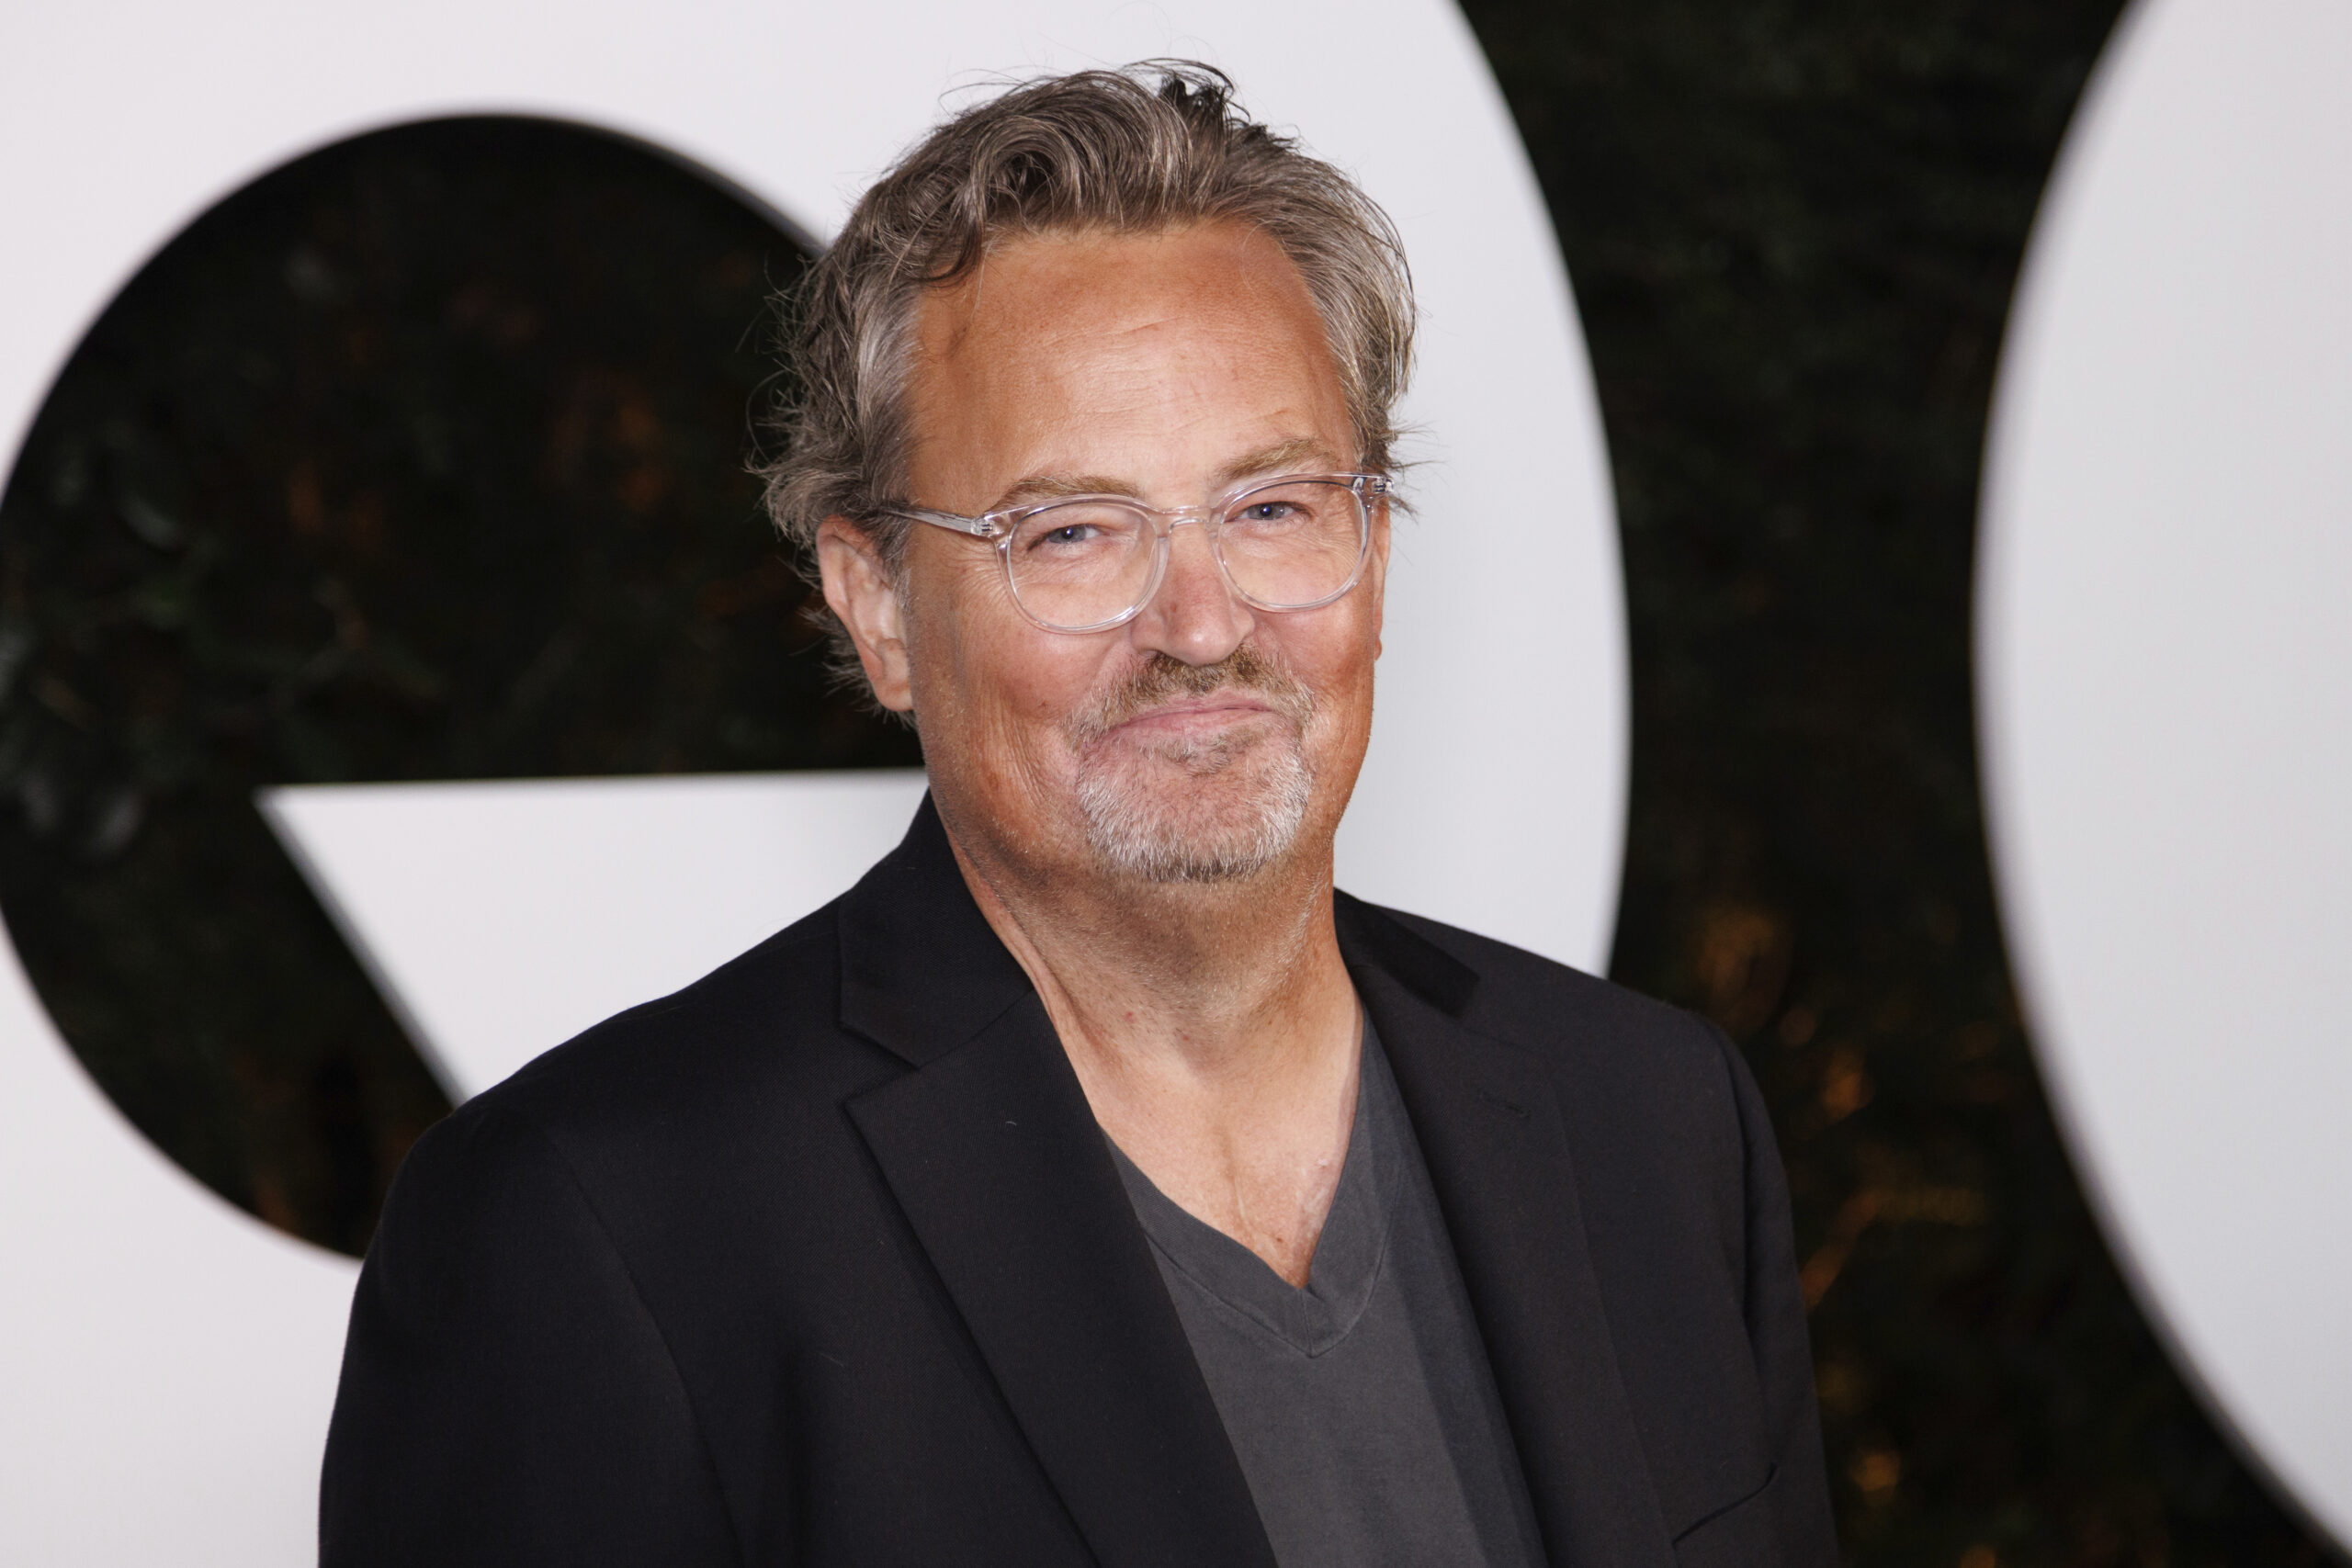 they-ask-for-$5.19-million-dollars-for-the-mansion-that-matthew-perry-bought-months-before-his-death